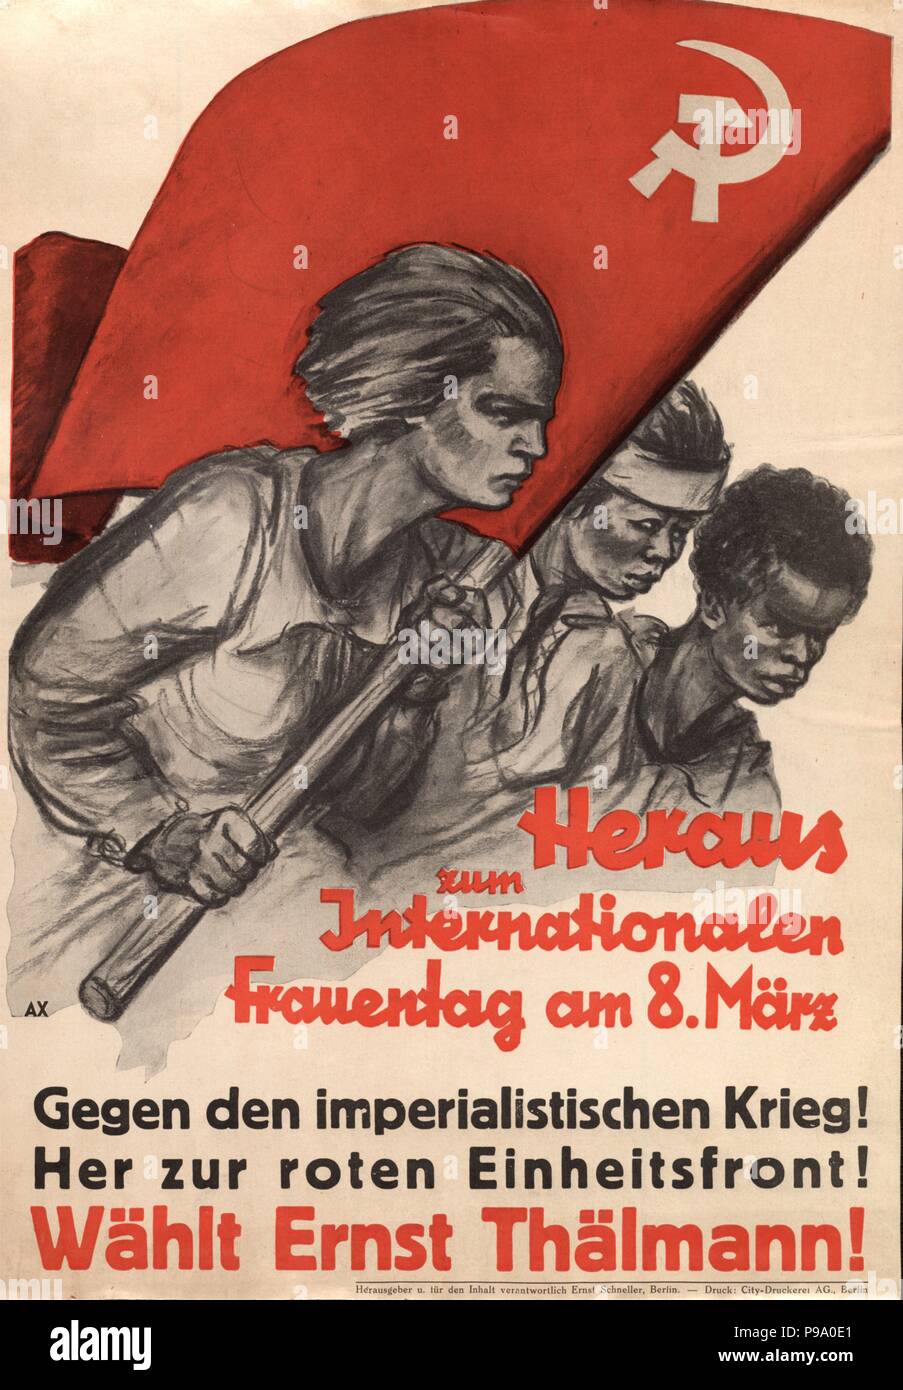 Out to International Women's Day. Vote Ernst Thälmann!. Museum: PRIVATE COLLECTION. Stock Photo